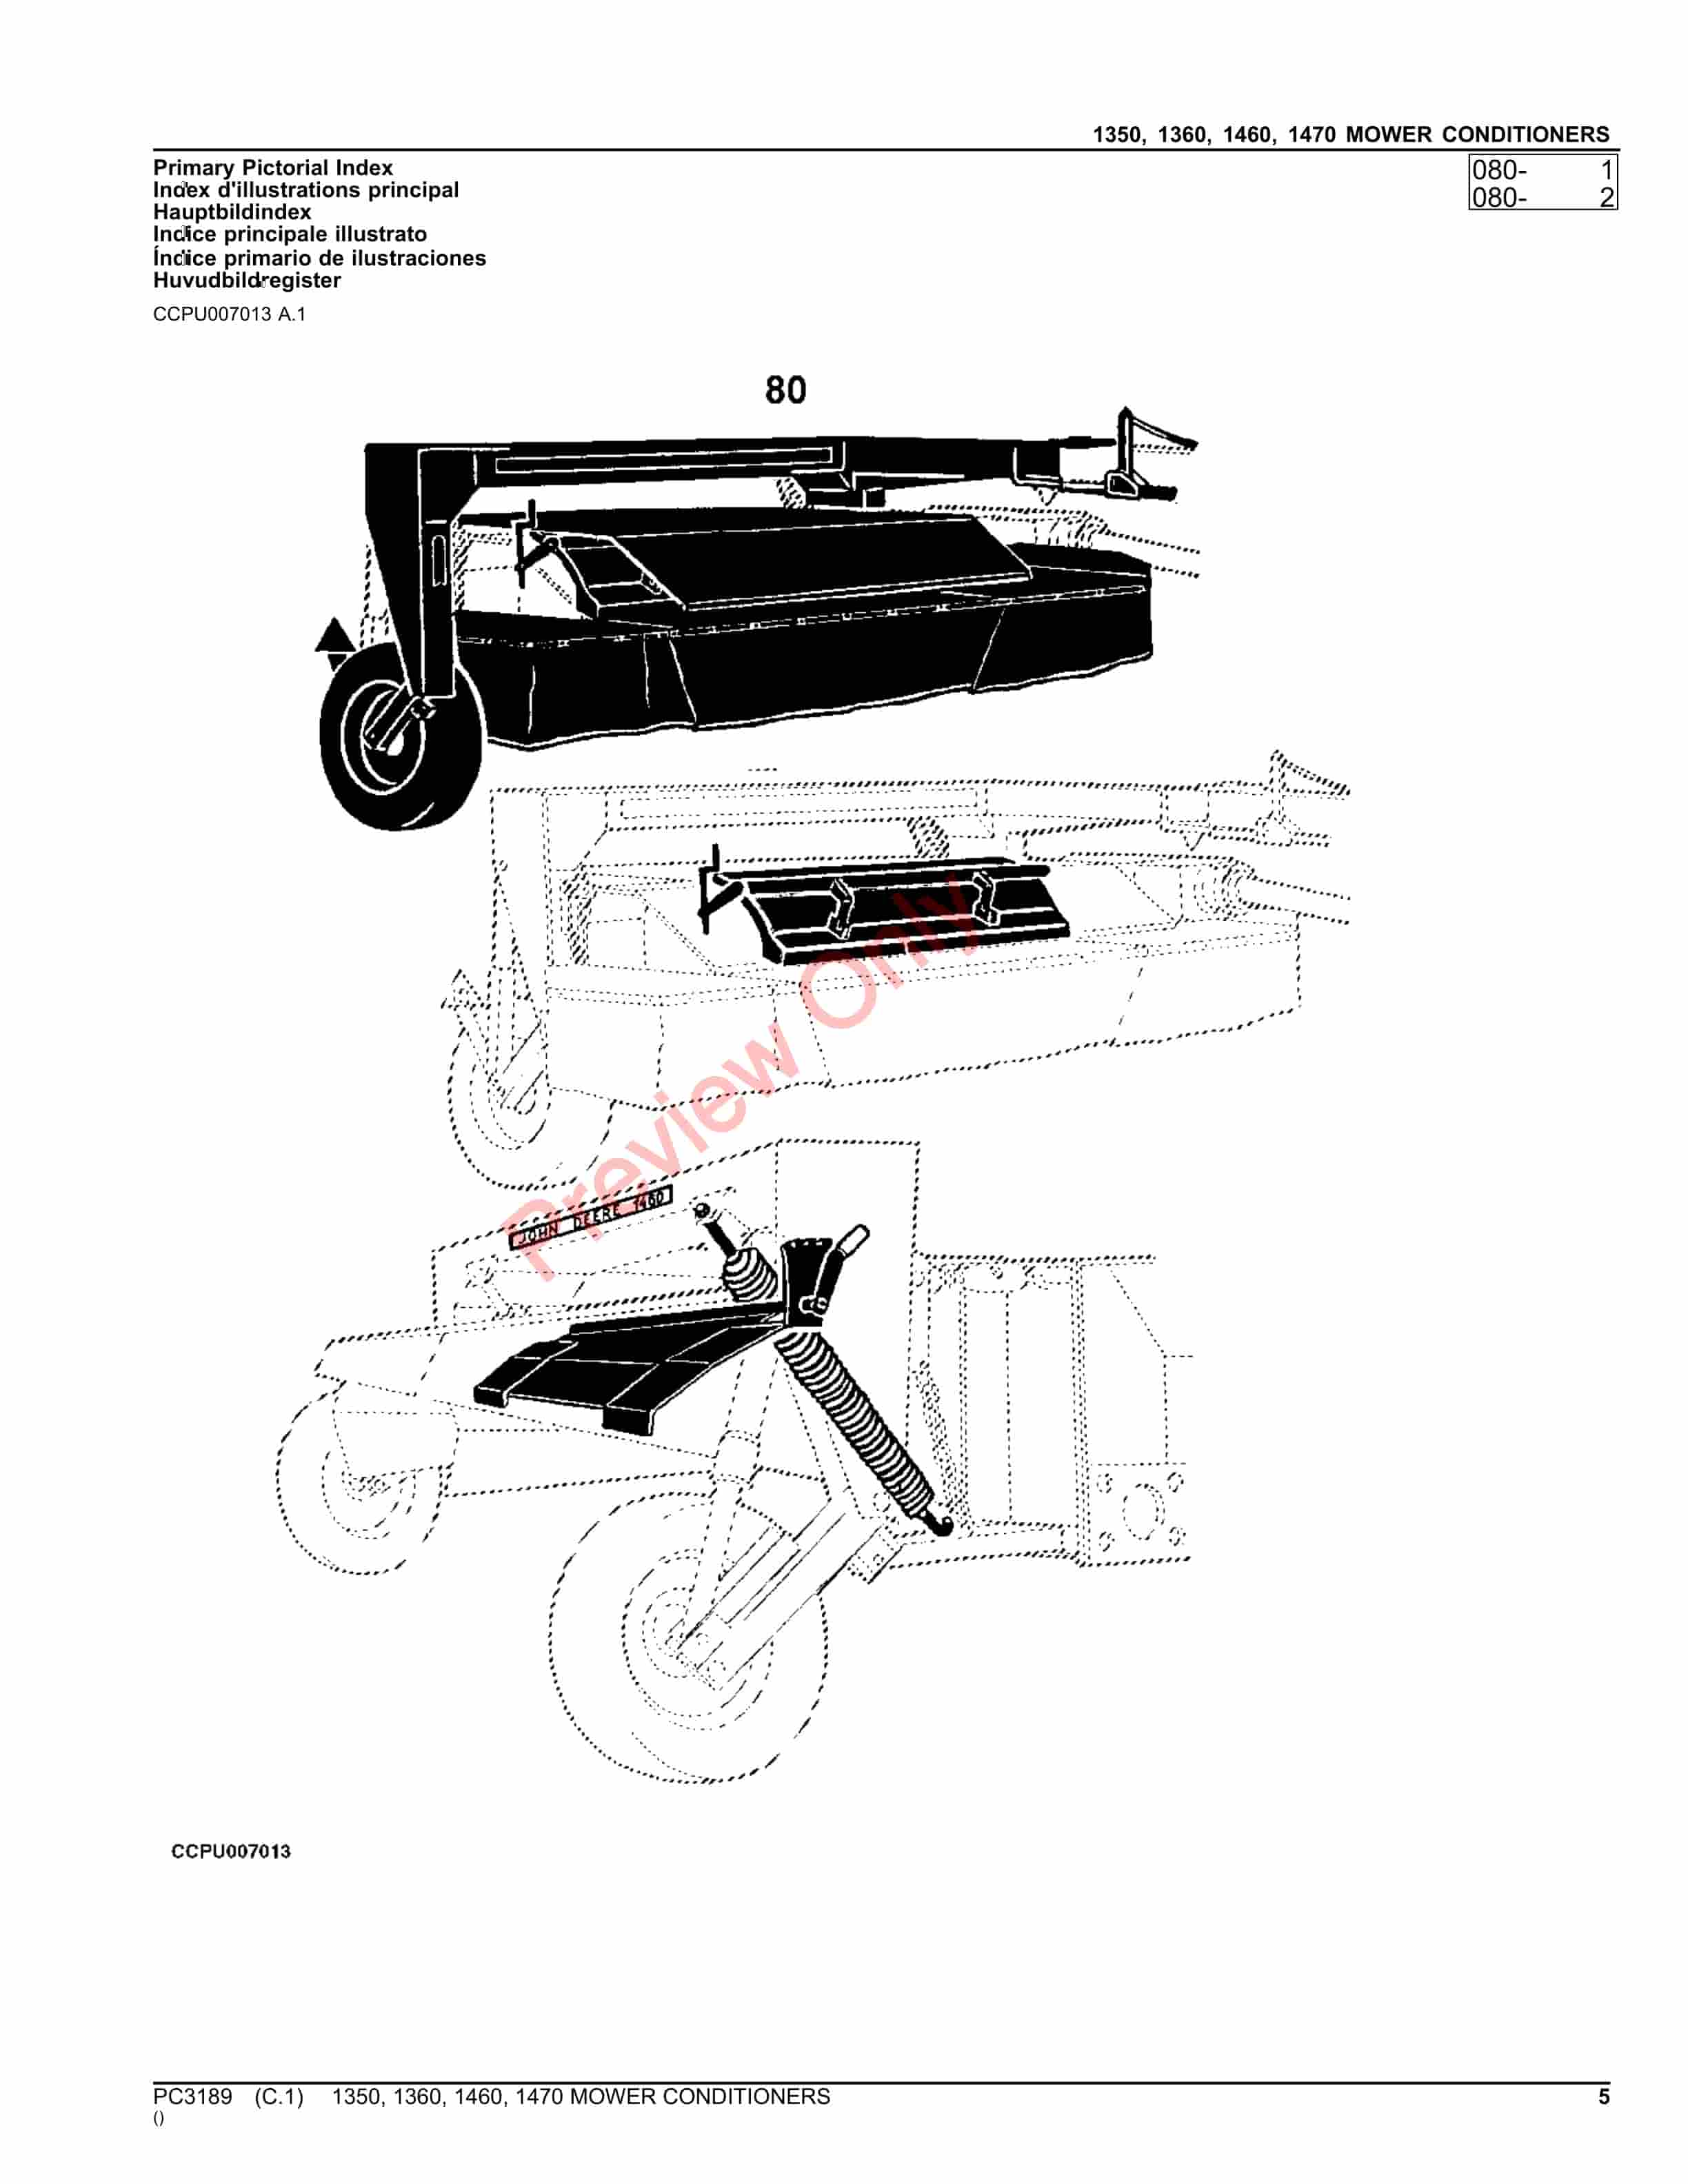 John Deere 1350, 1360, 1460 AND 1470 MOWER CONDITIONERS Parts Catalog PC3189 23AUG21-5